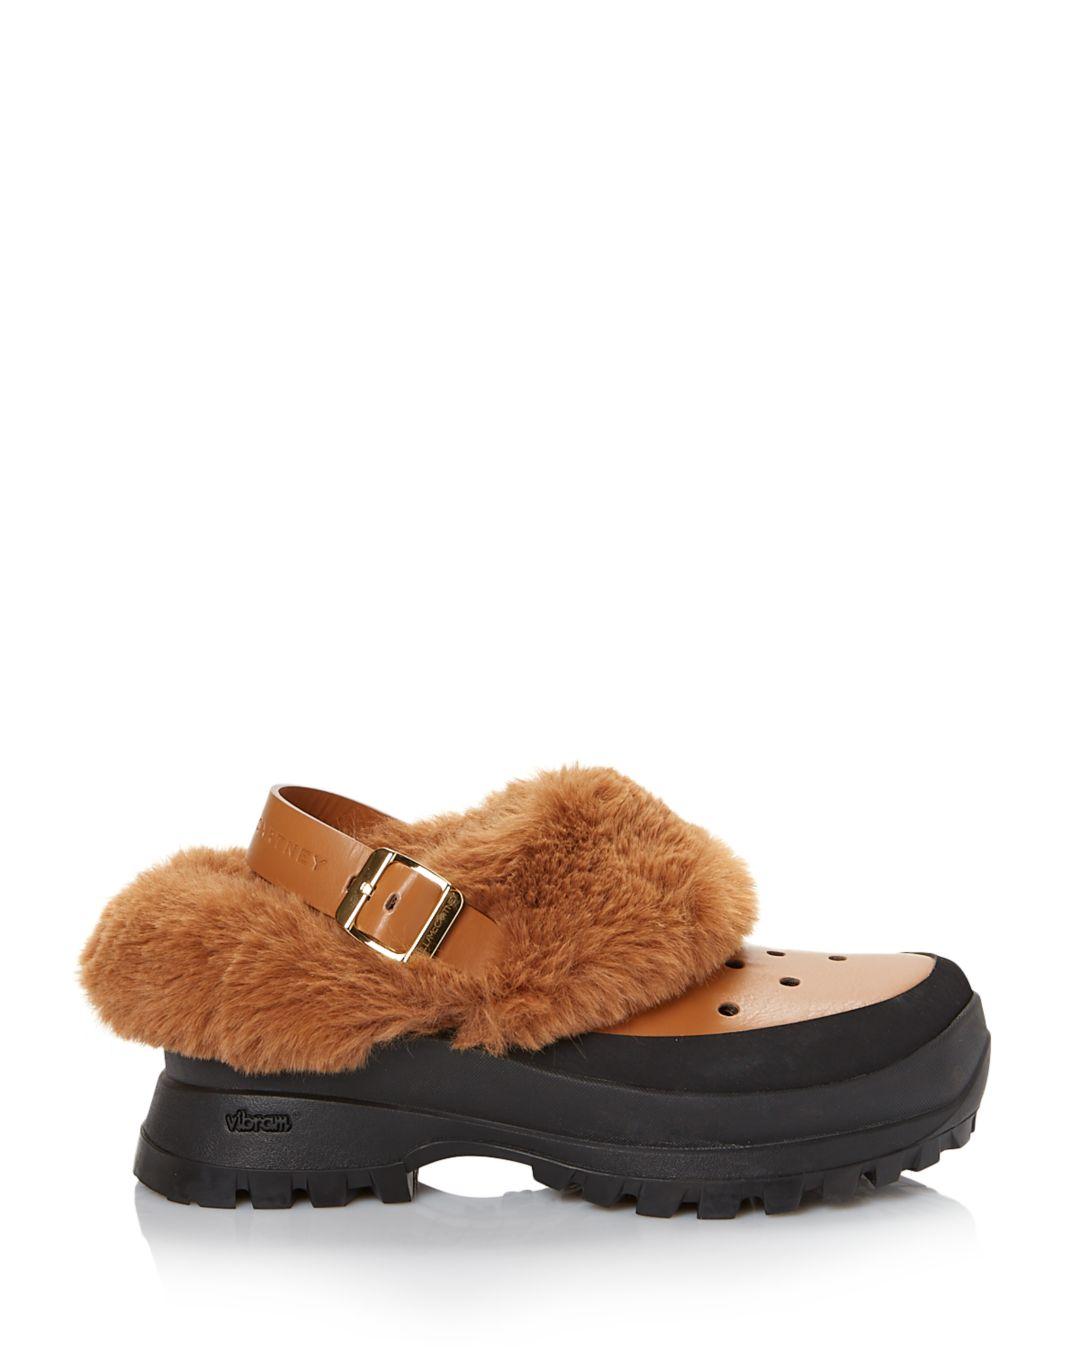 Stella McCartney Synthetic Trace Faux Fur Lined Clogs in Brown - Lyst